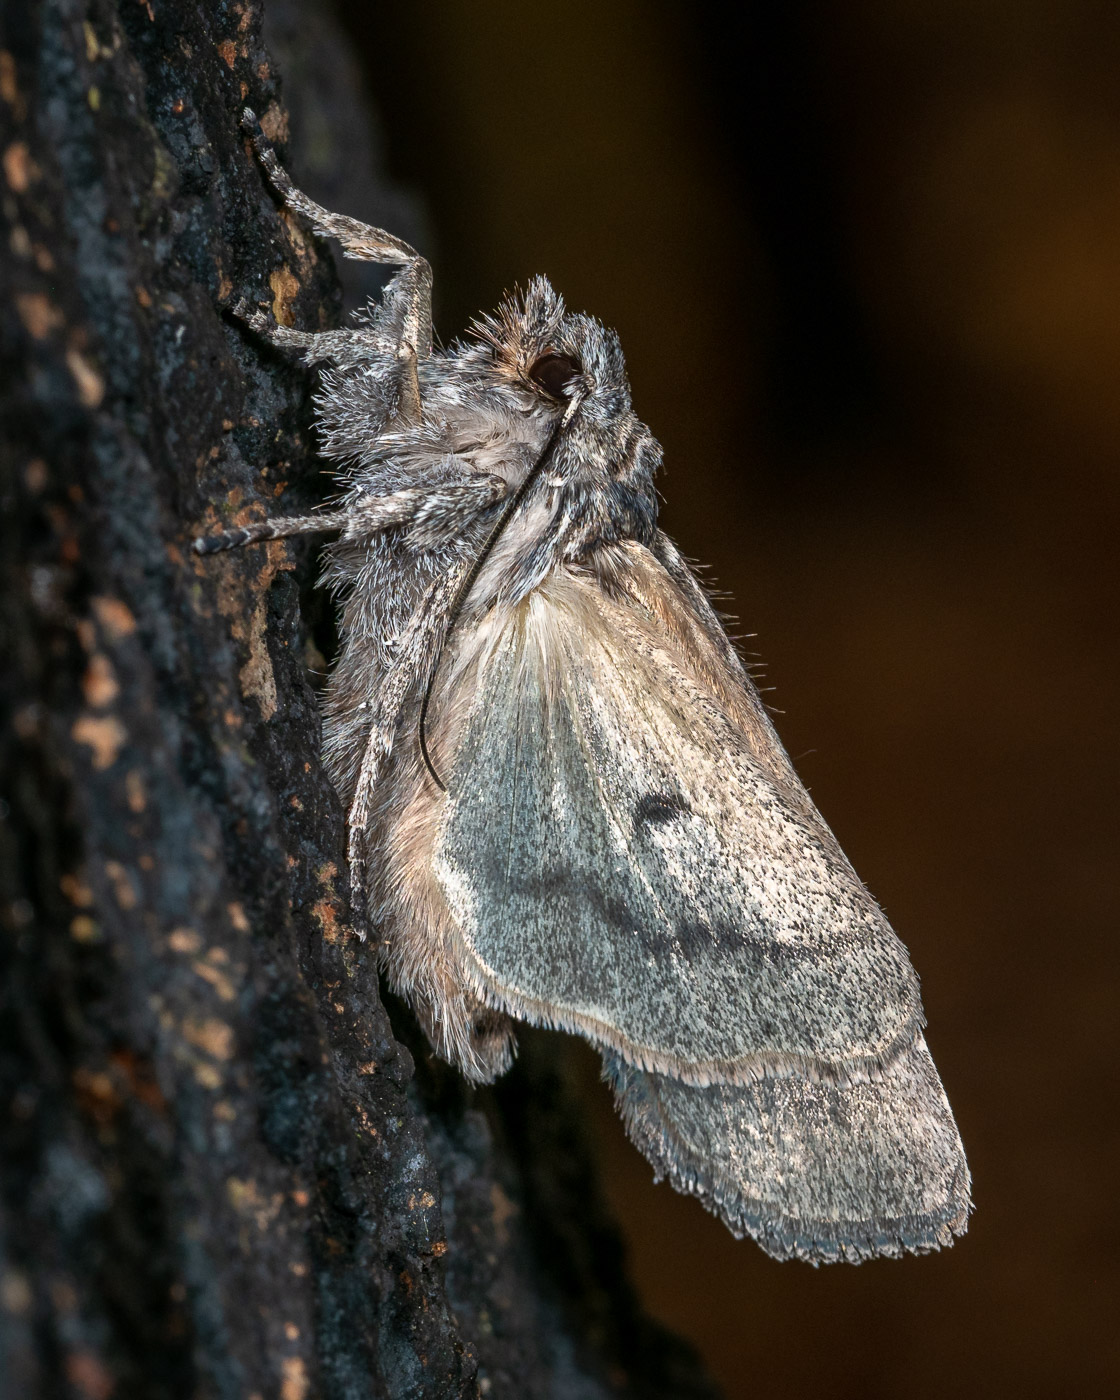 Dagger Moth perched on tree trunk